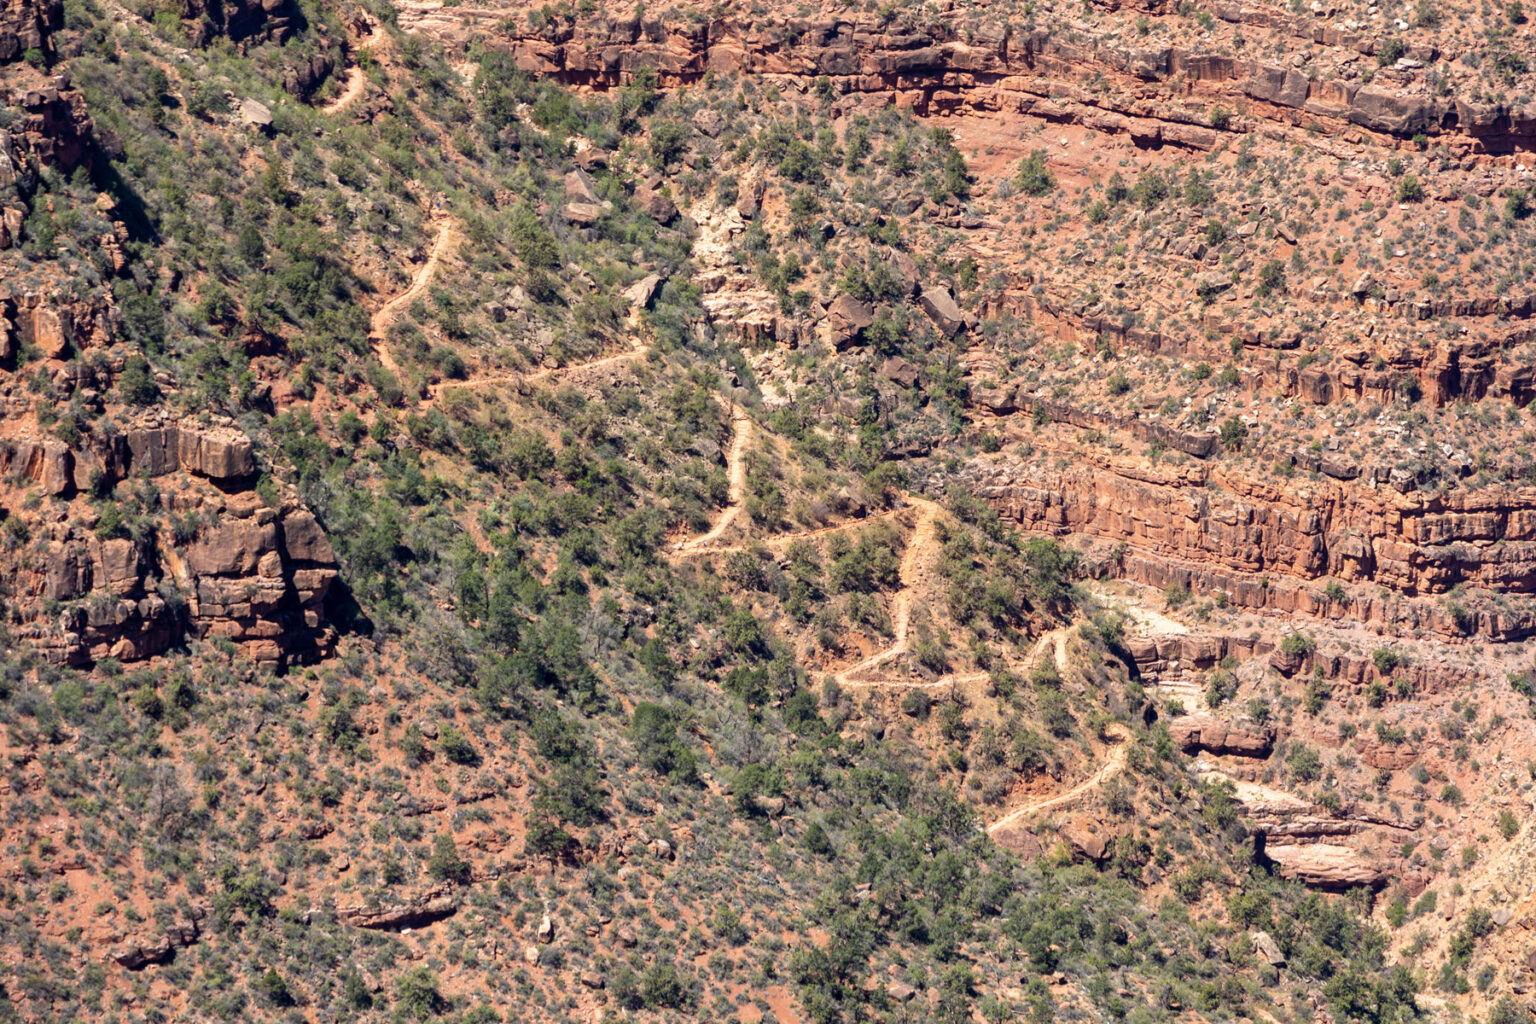 Zig zagging section of the Bright Angel Trail in Grand Canyon National Park